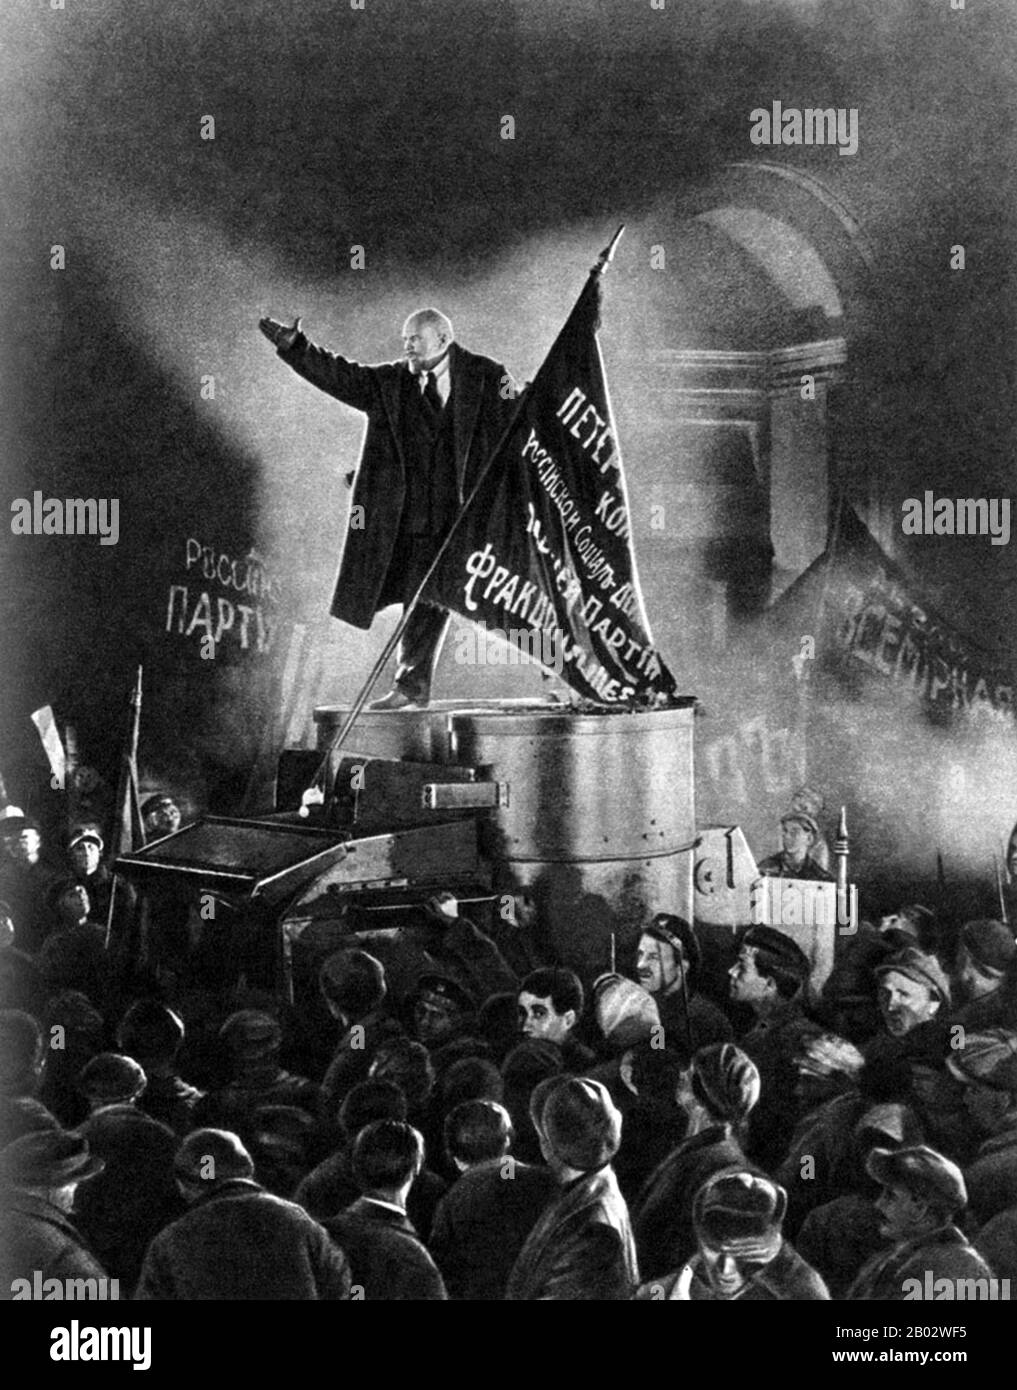 'October - Ten Days That Shook the World'  is a 1928 Soviet silent propaganda film by Sergei Eisenstein and Grigori Aleksandrov. It is a celebratory dramatization of the 1917 October Revolution commissioned for the tenth anniversary of the event.  Originally released as October in the Soviet Union, the film was re-edited and released internationally as Ten Days That Shook The World, after John Reed's popular book on the Revolution. Stock Photo